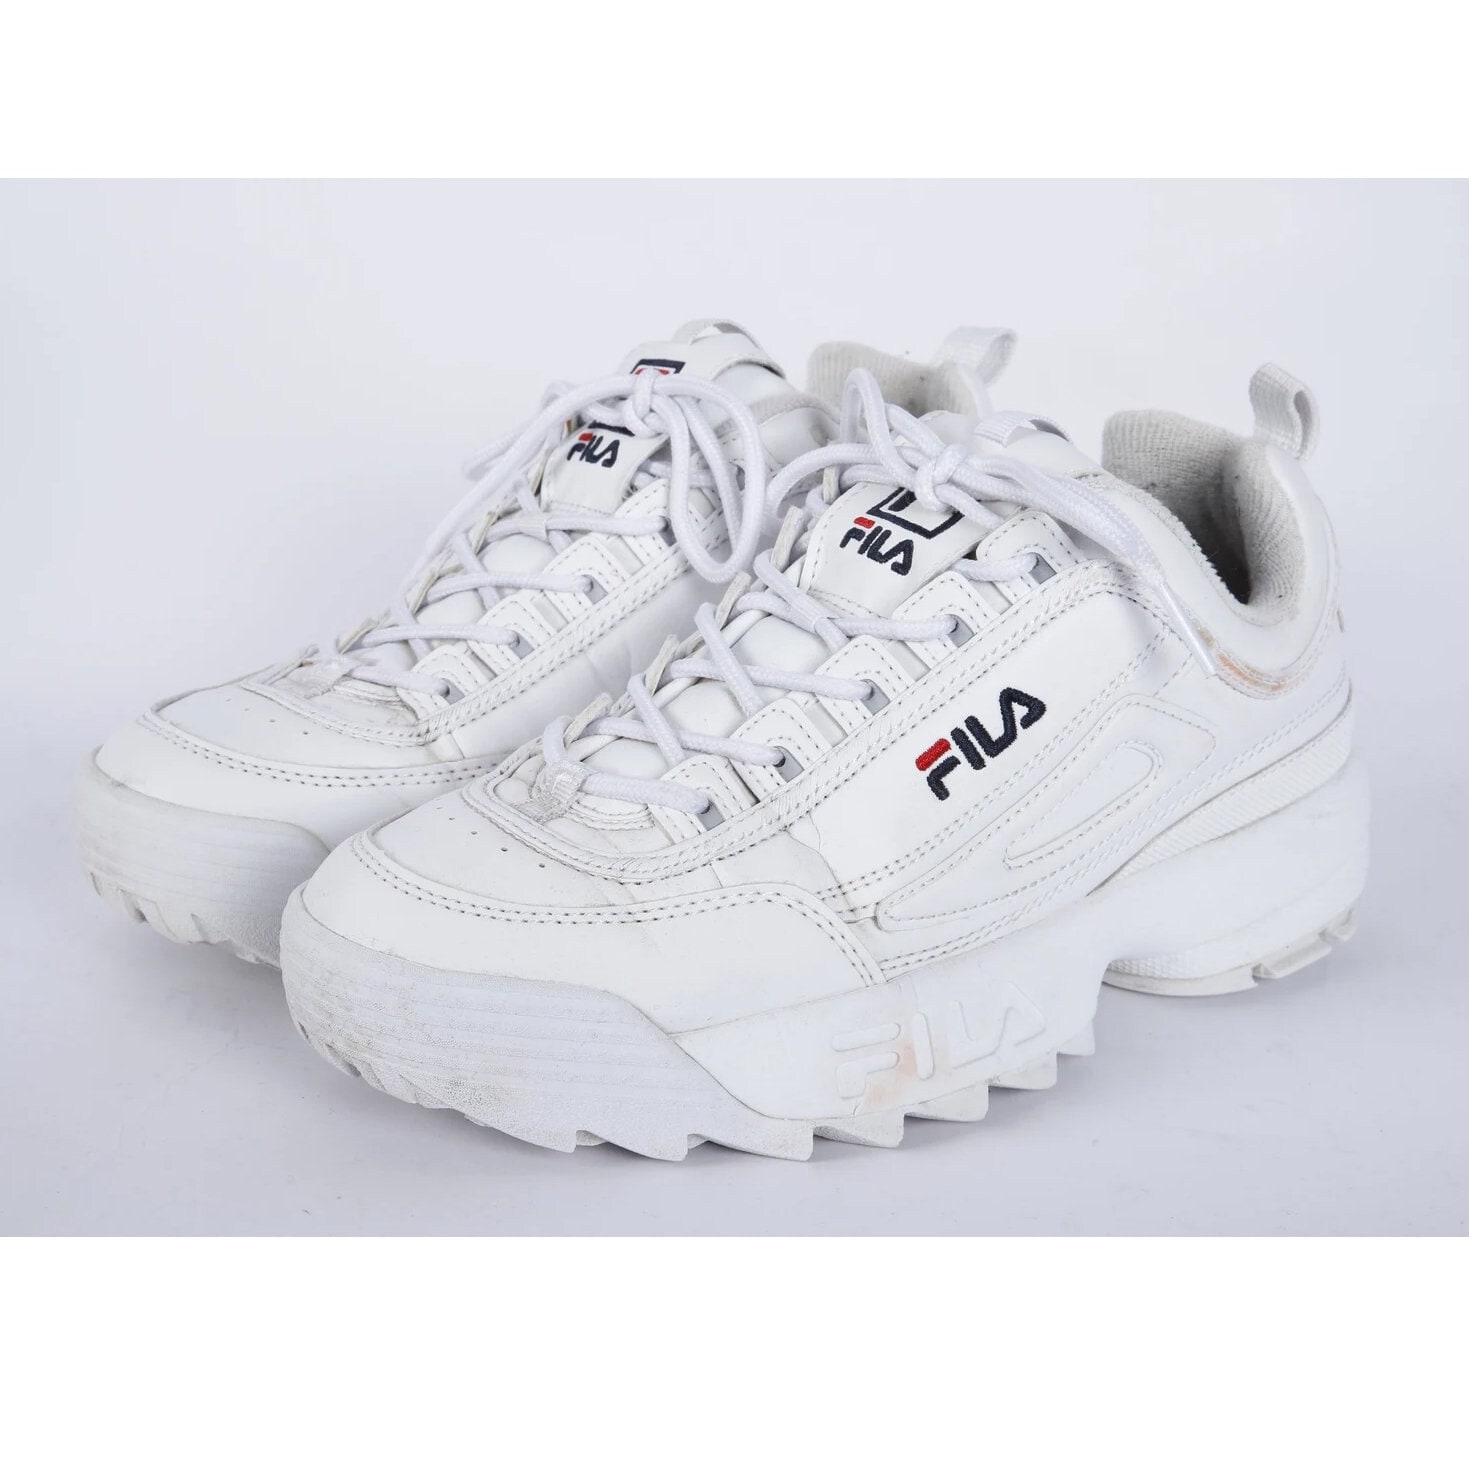 FILA Place 14 - White Multi Striped Sneakers - Lace-Up Sneakers - Lulus